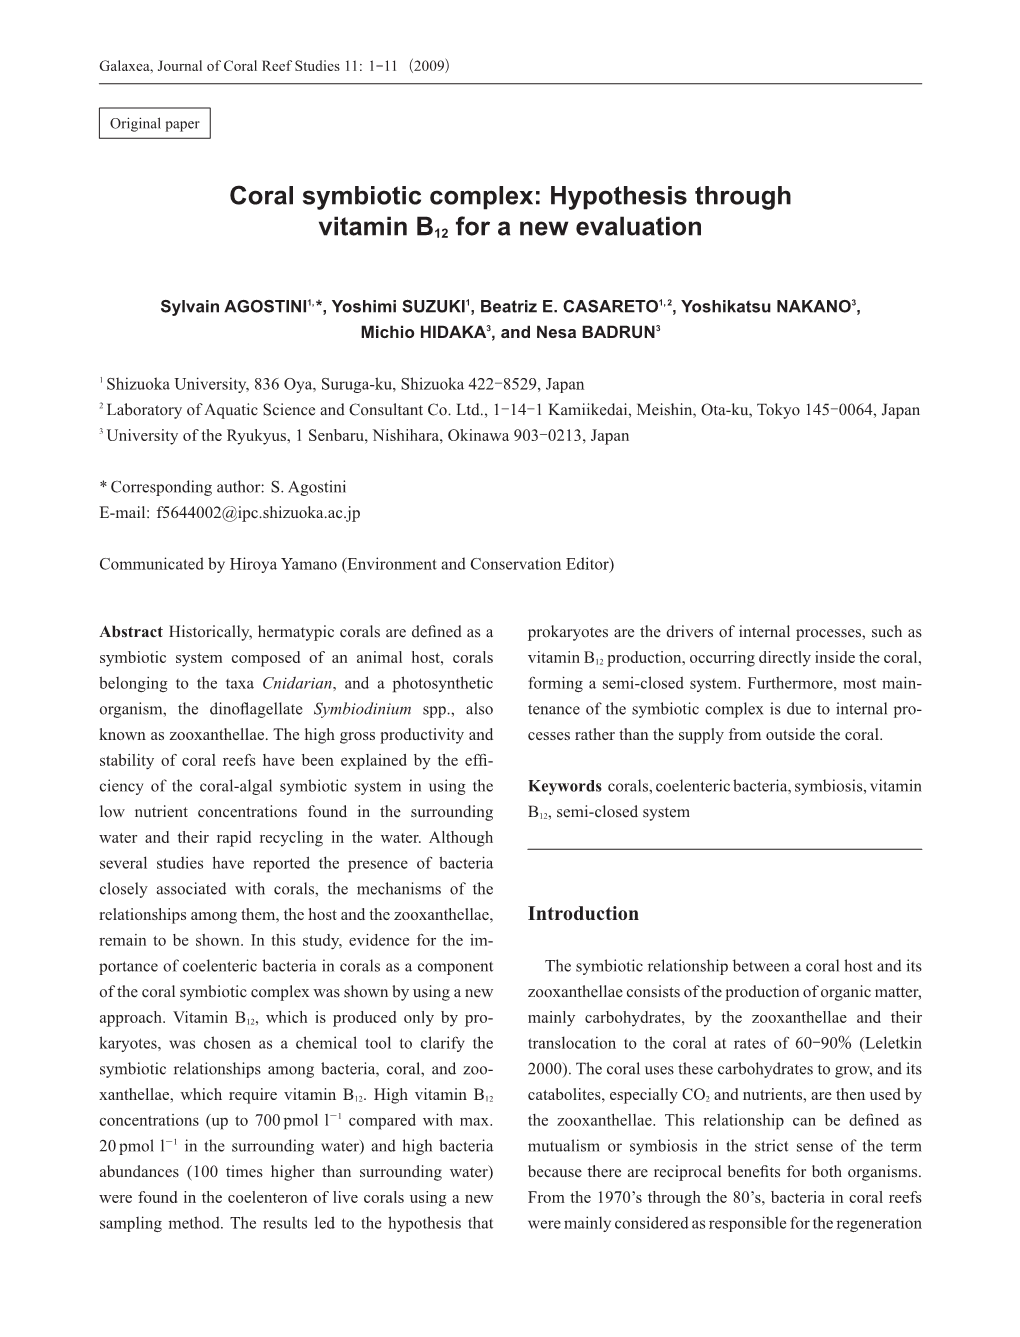 Coral Symbiotic Complex: Hypothesis Through Vitamin B12 for a New